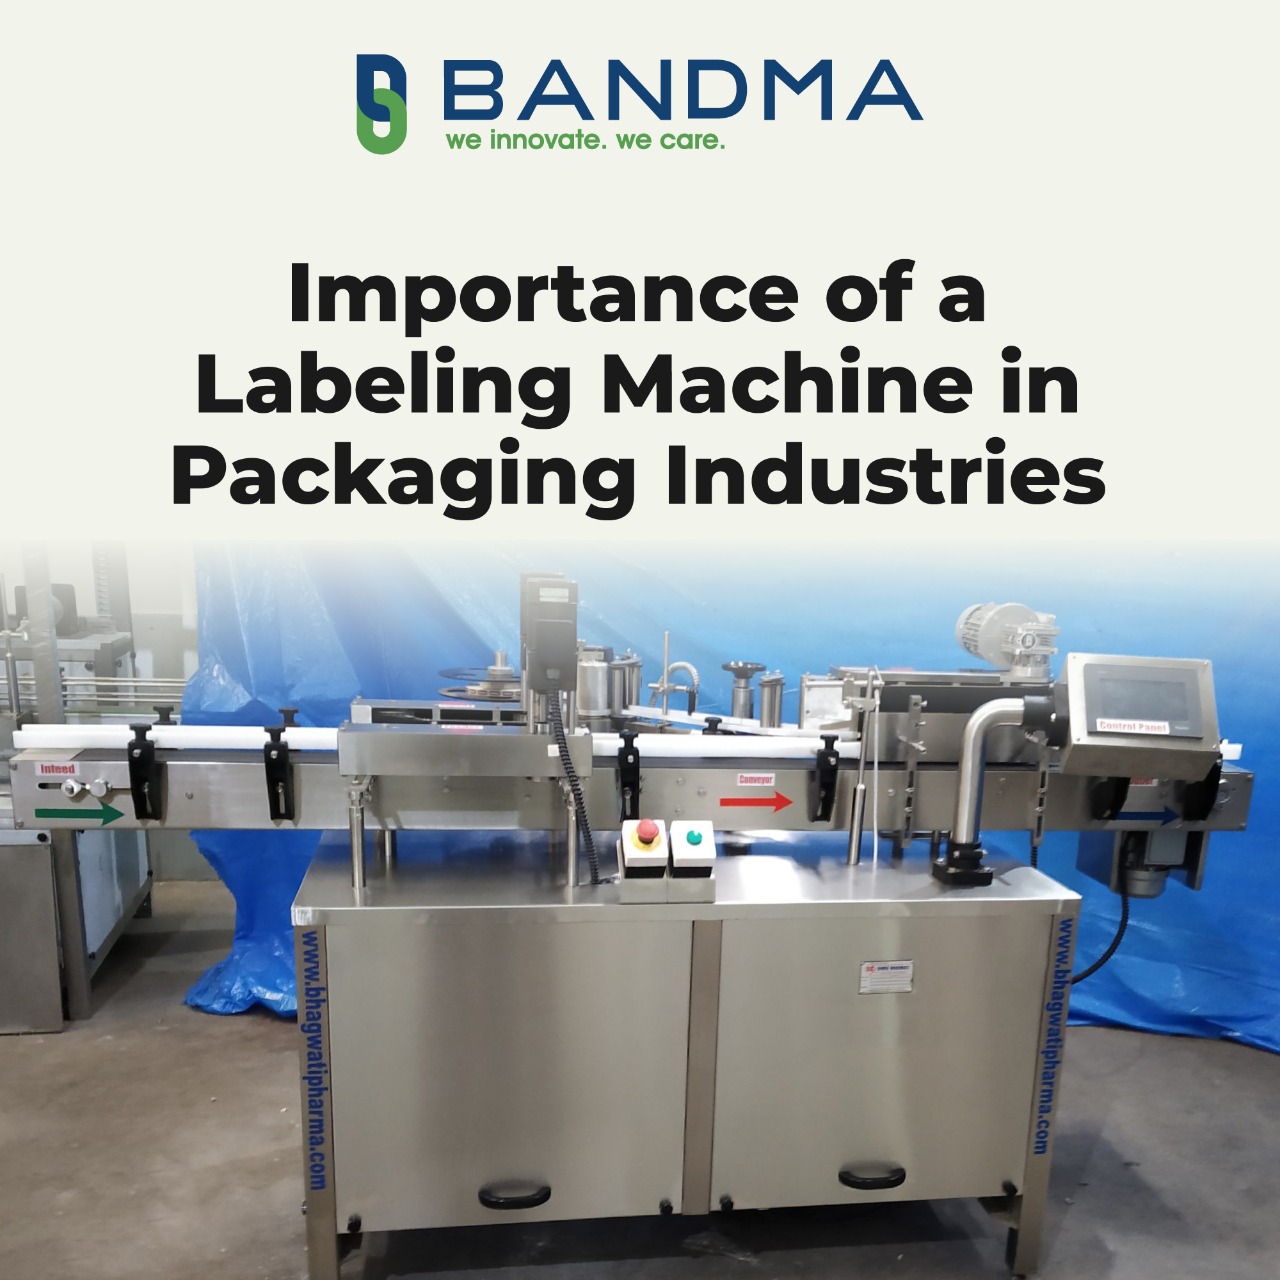 Importance of a Labeling Machine in Packaging Industries: